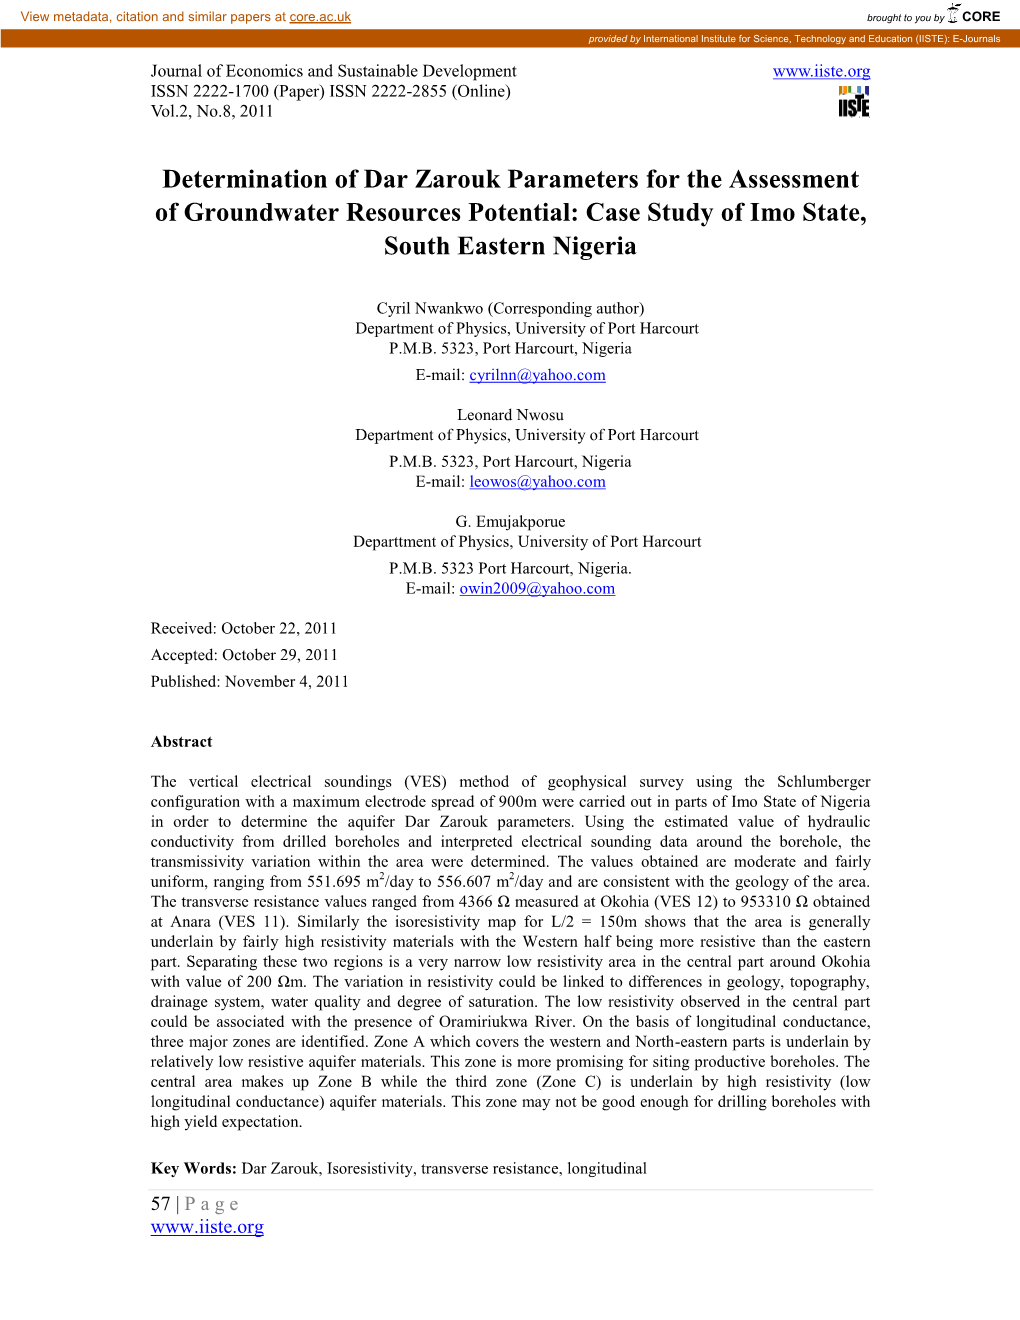 Determination of Dar Zarouk Parameters for the Assessment of Groundwater Resources Potential: Case Study of Imo State, South Eastern Nigeria